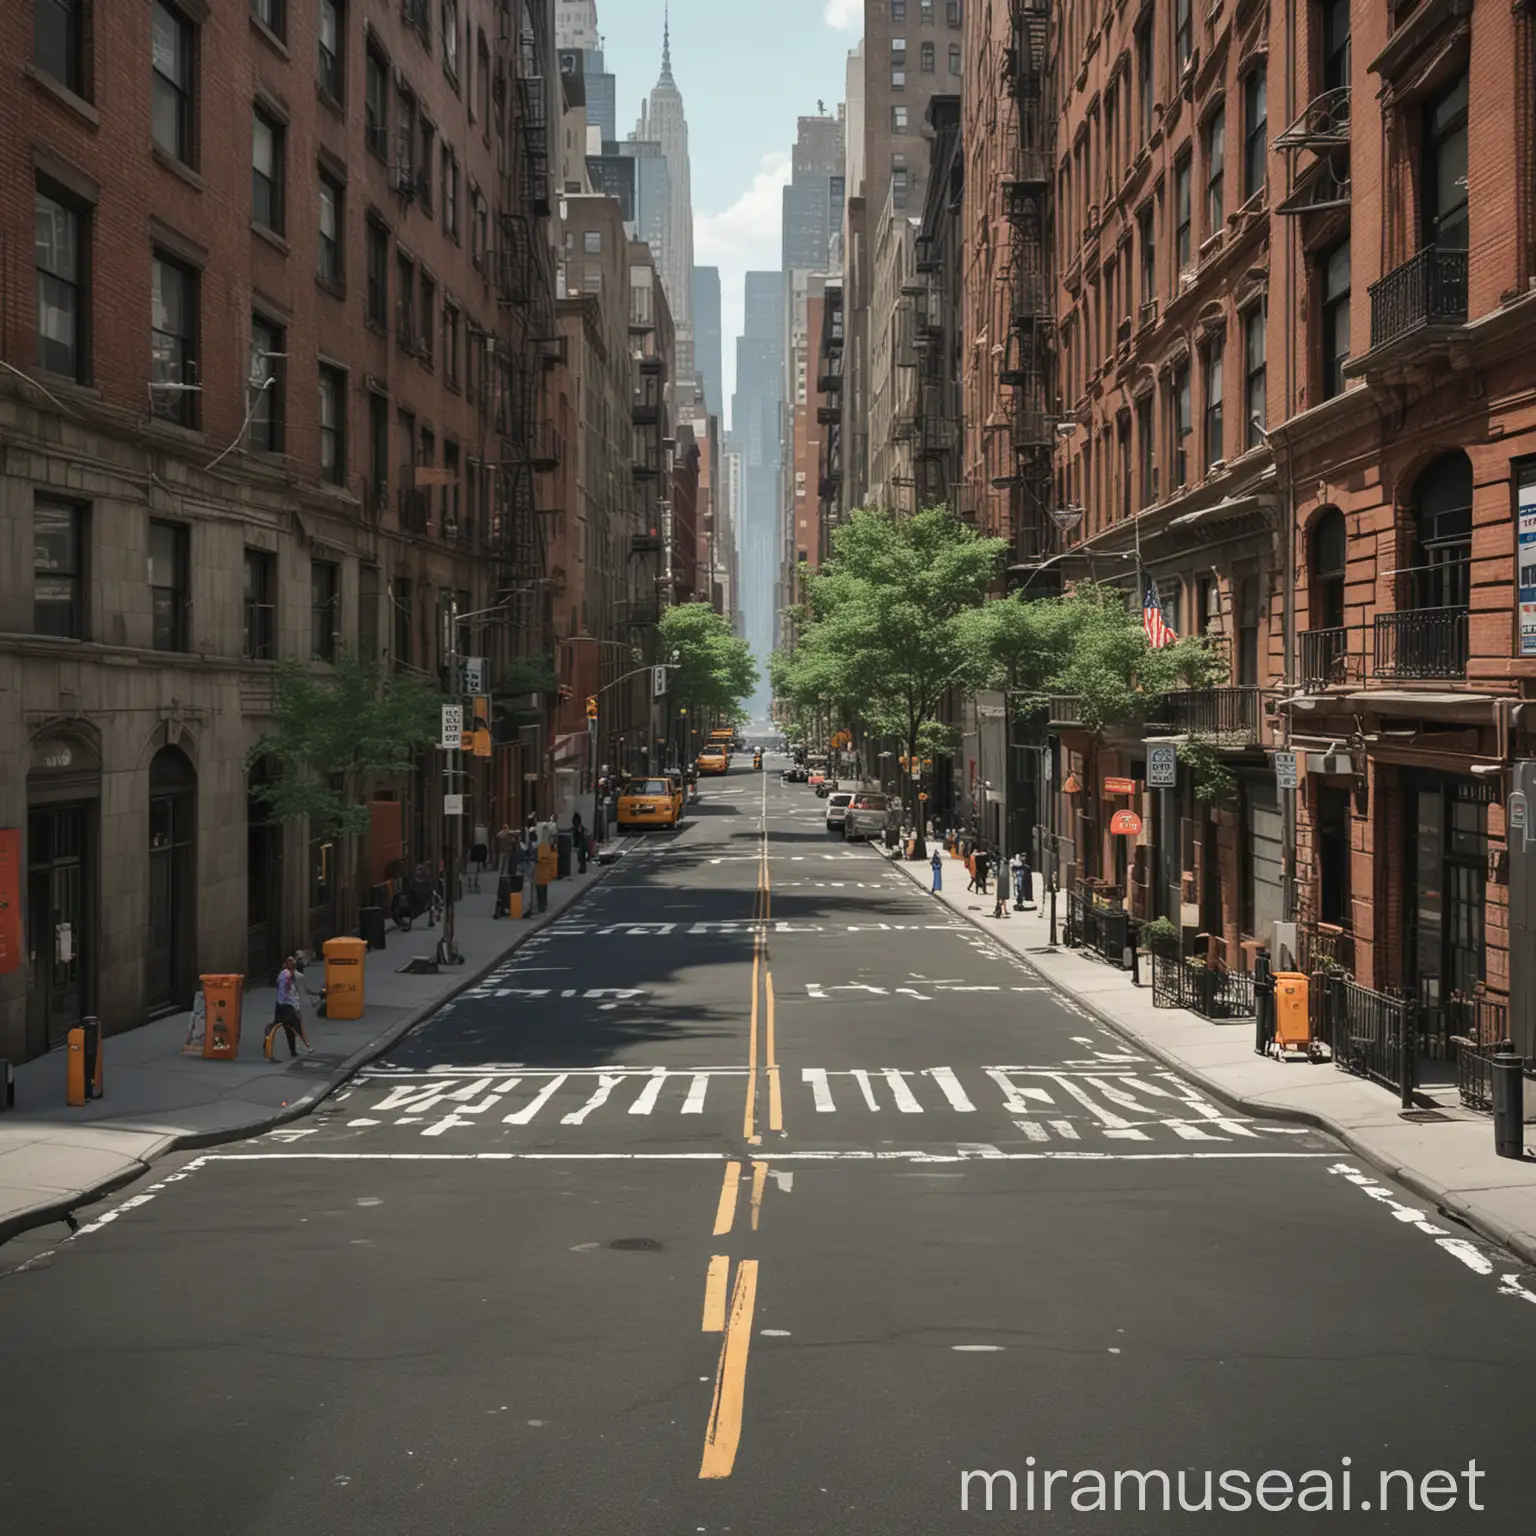 New York City Street Scene with Urban Architecture and Pedestrians